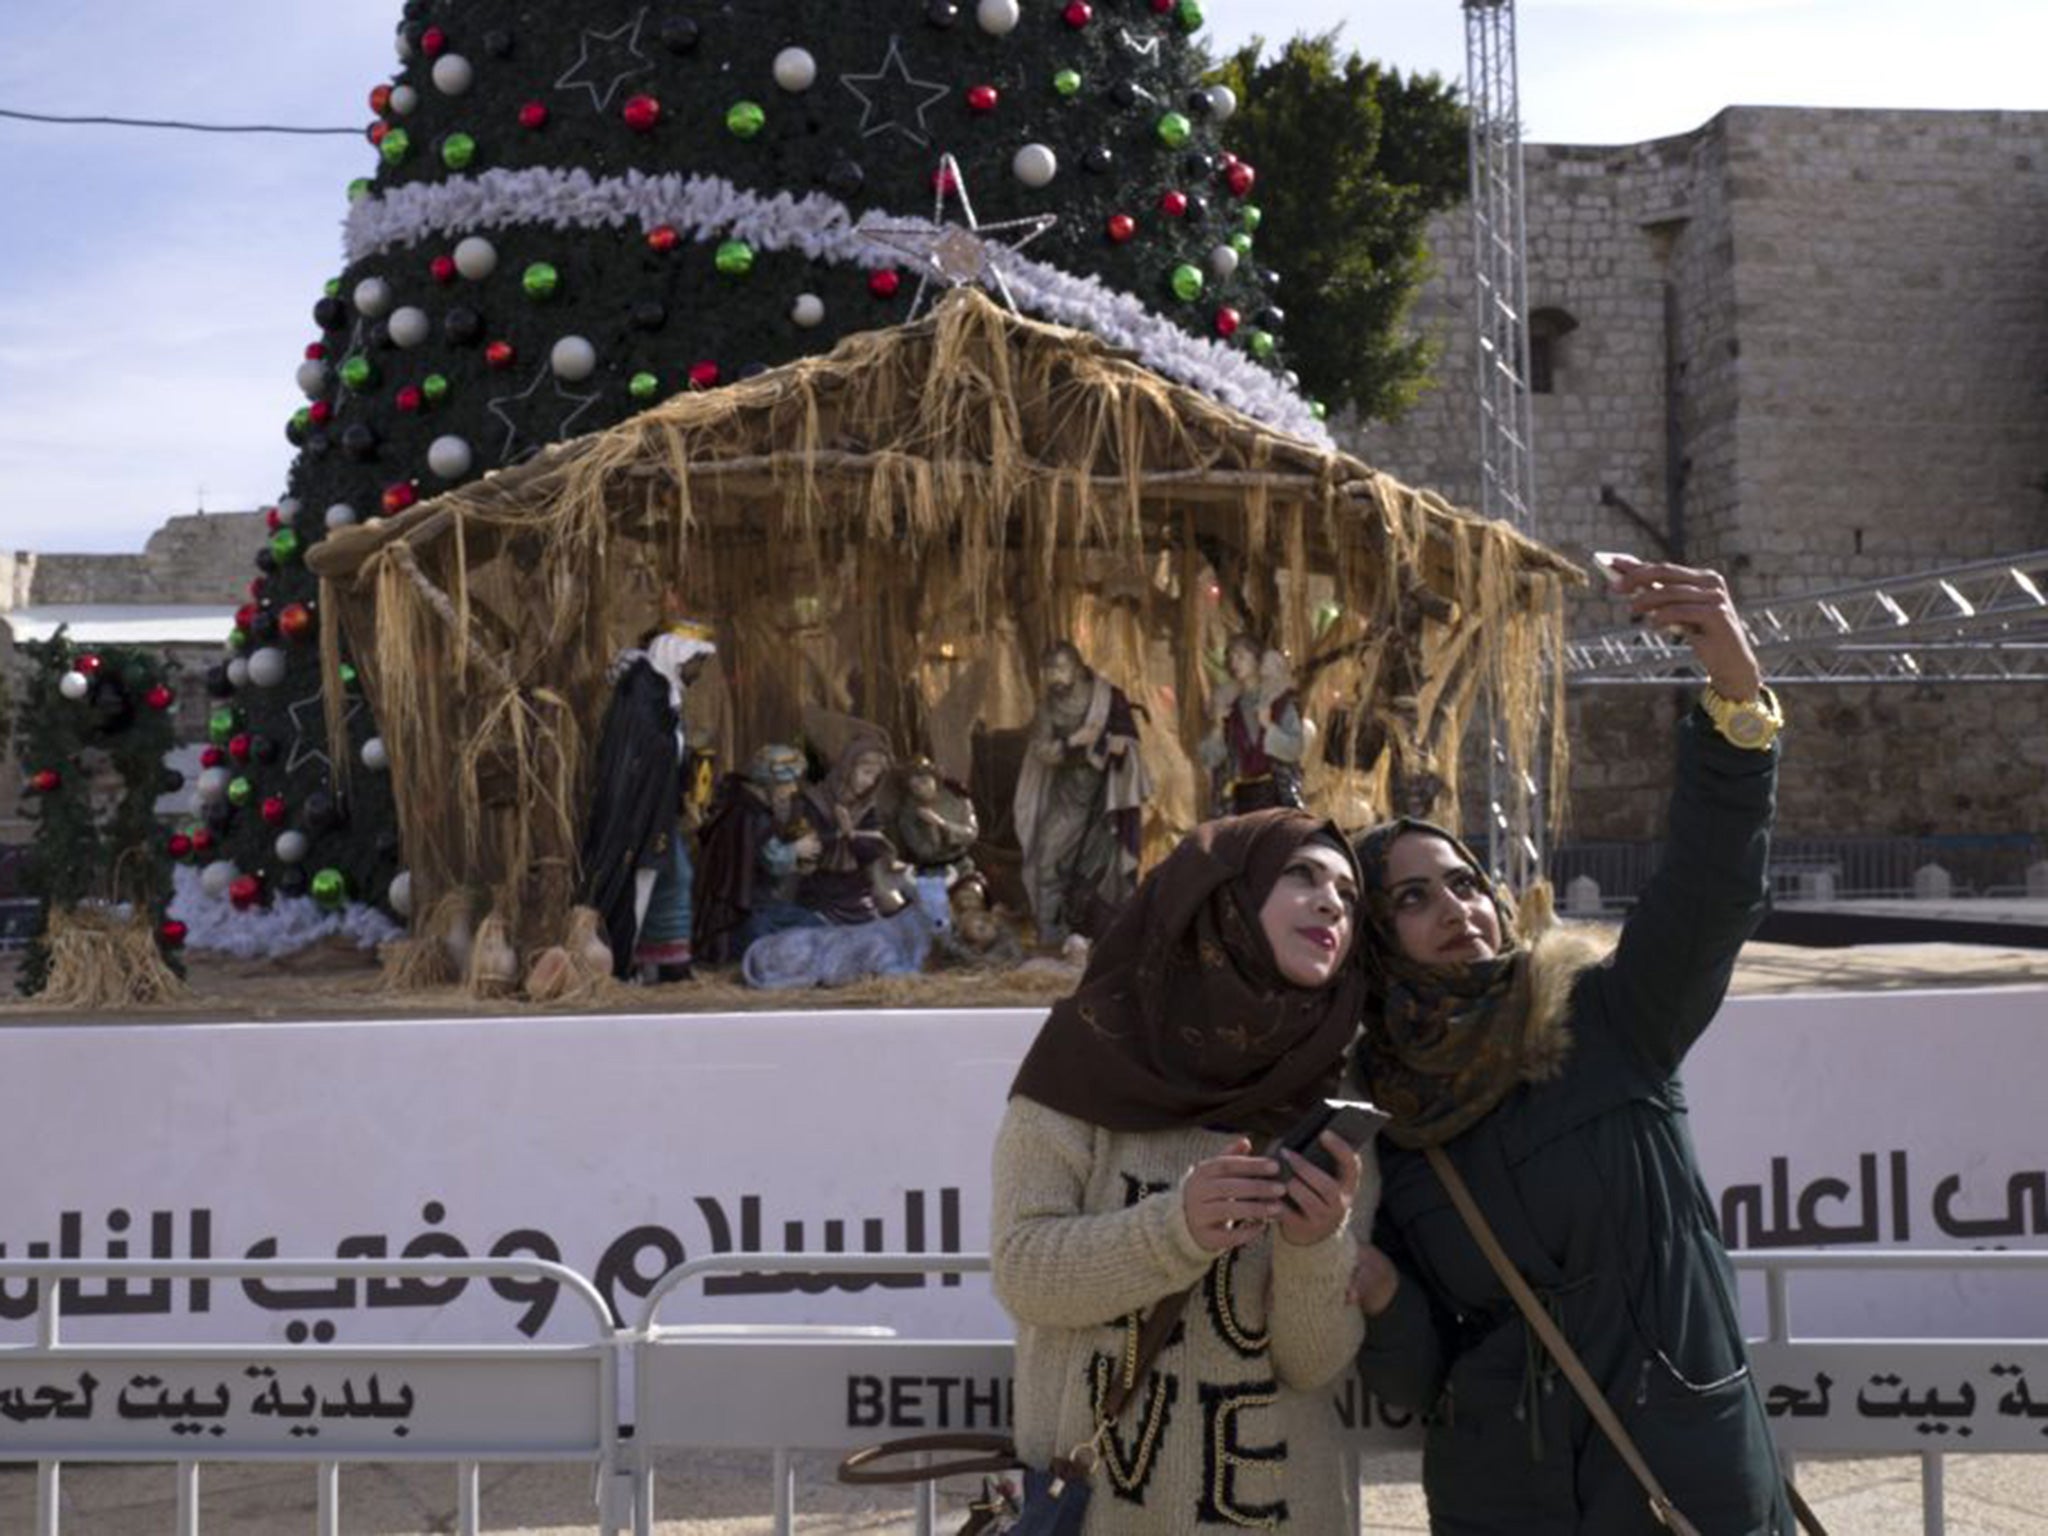 Palestinian women take selfies in front of the Christmas tree and a large Nativity scene in Manger Square in the West Bank town of Bethlehem